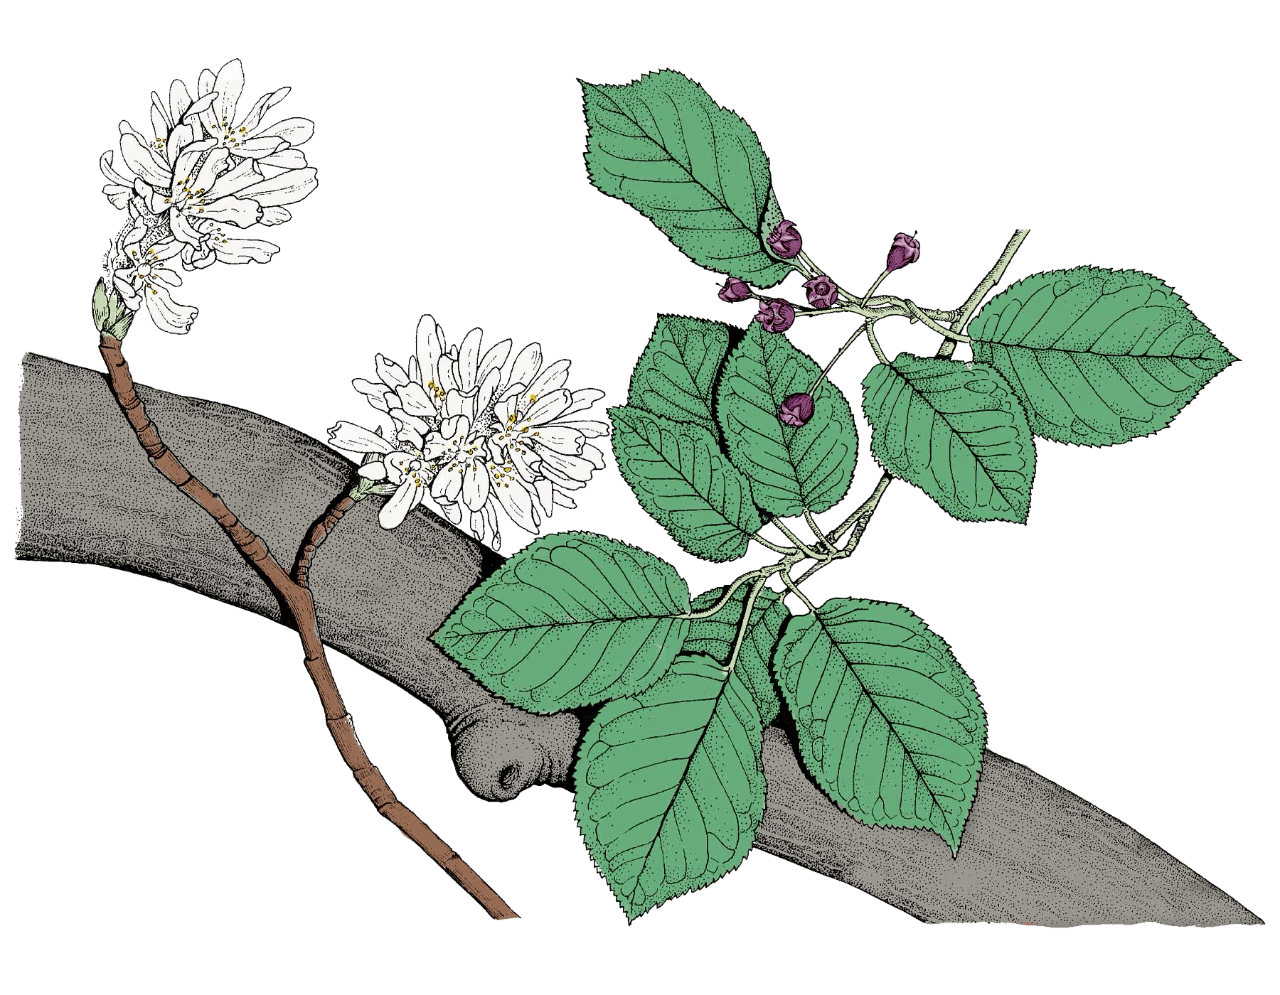 drawing of downy serviceberry